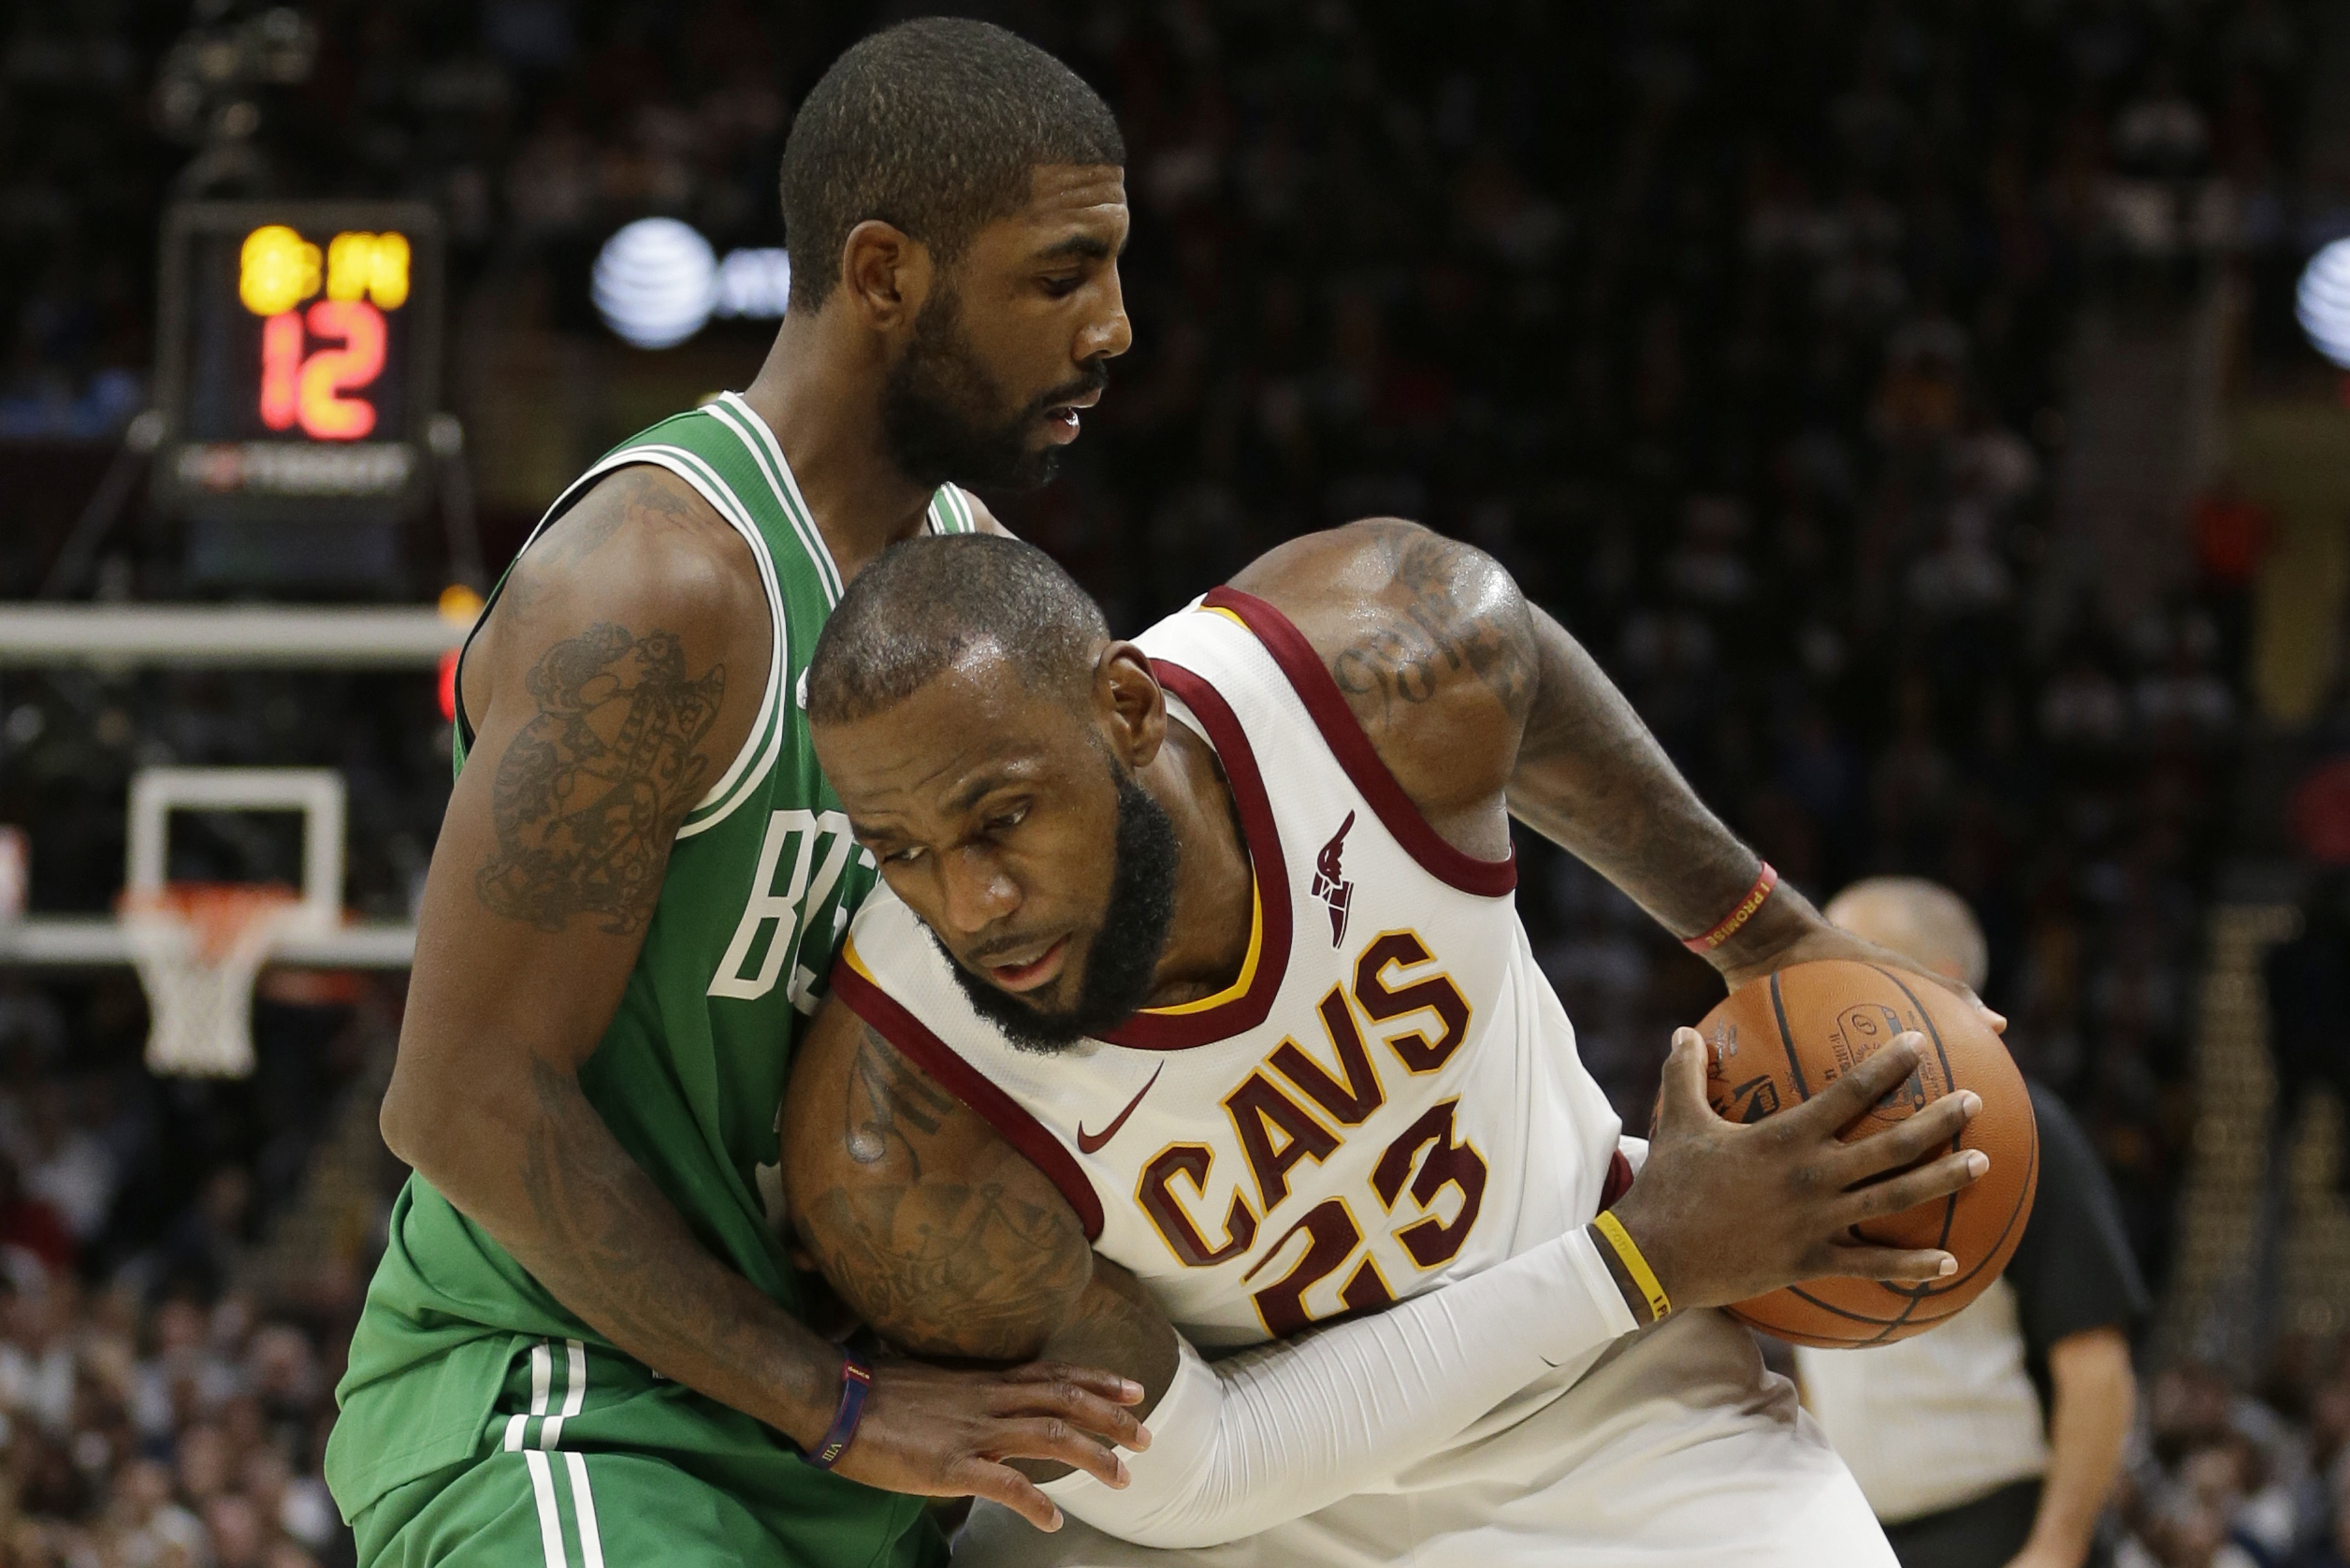 LeBron James Reportedly 'Devastated' by Kyrie Irving's Cavs Trade